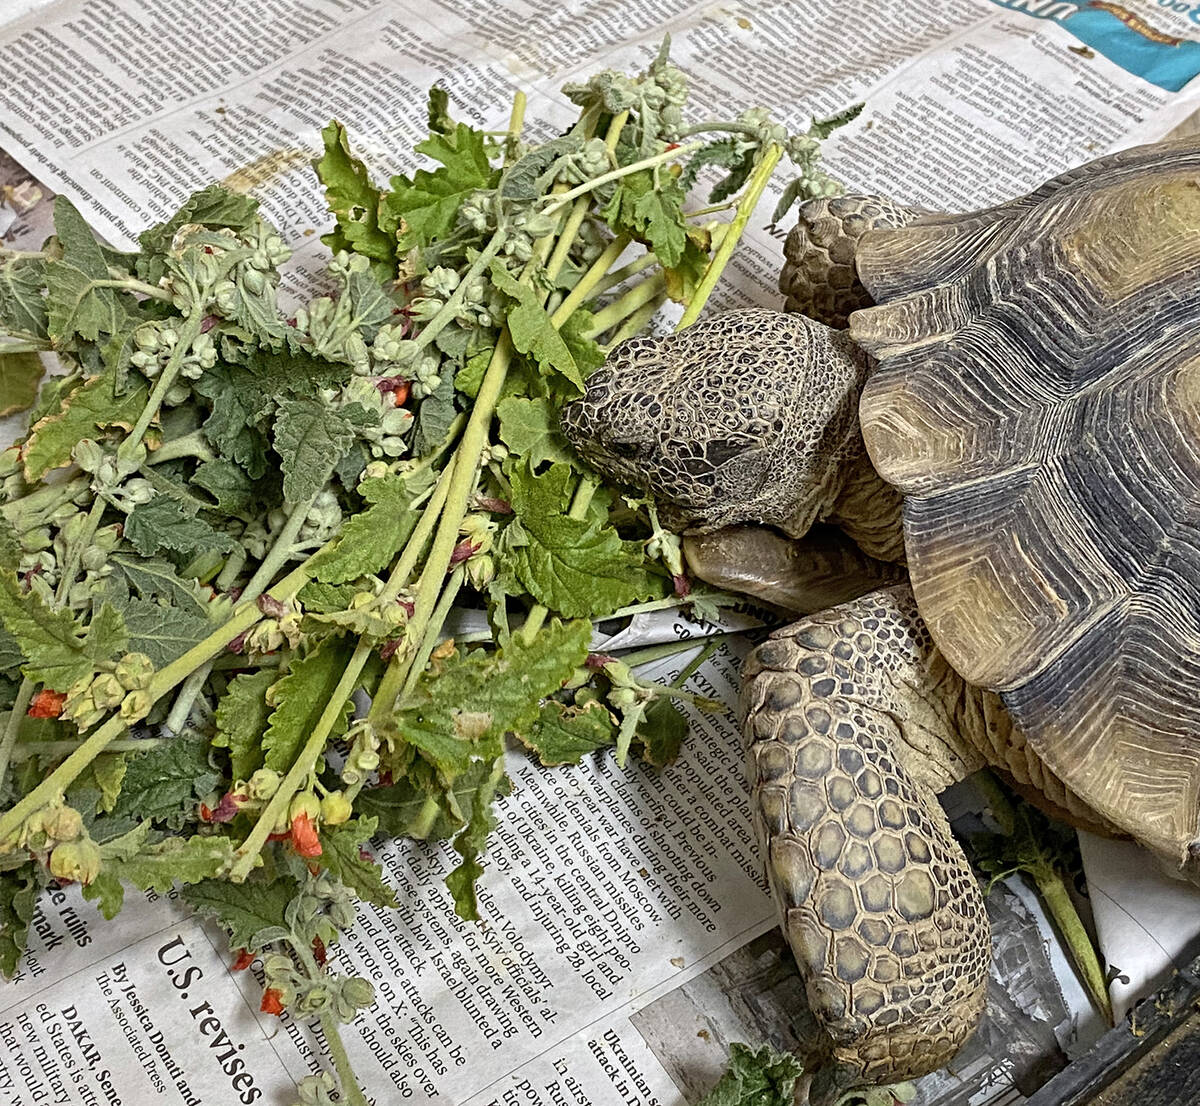 Robin Hebrock/Pahrump Valley Times Sheldon the desert tortoise was on display at this year's Ea ...